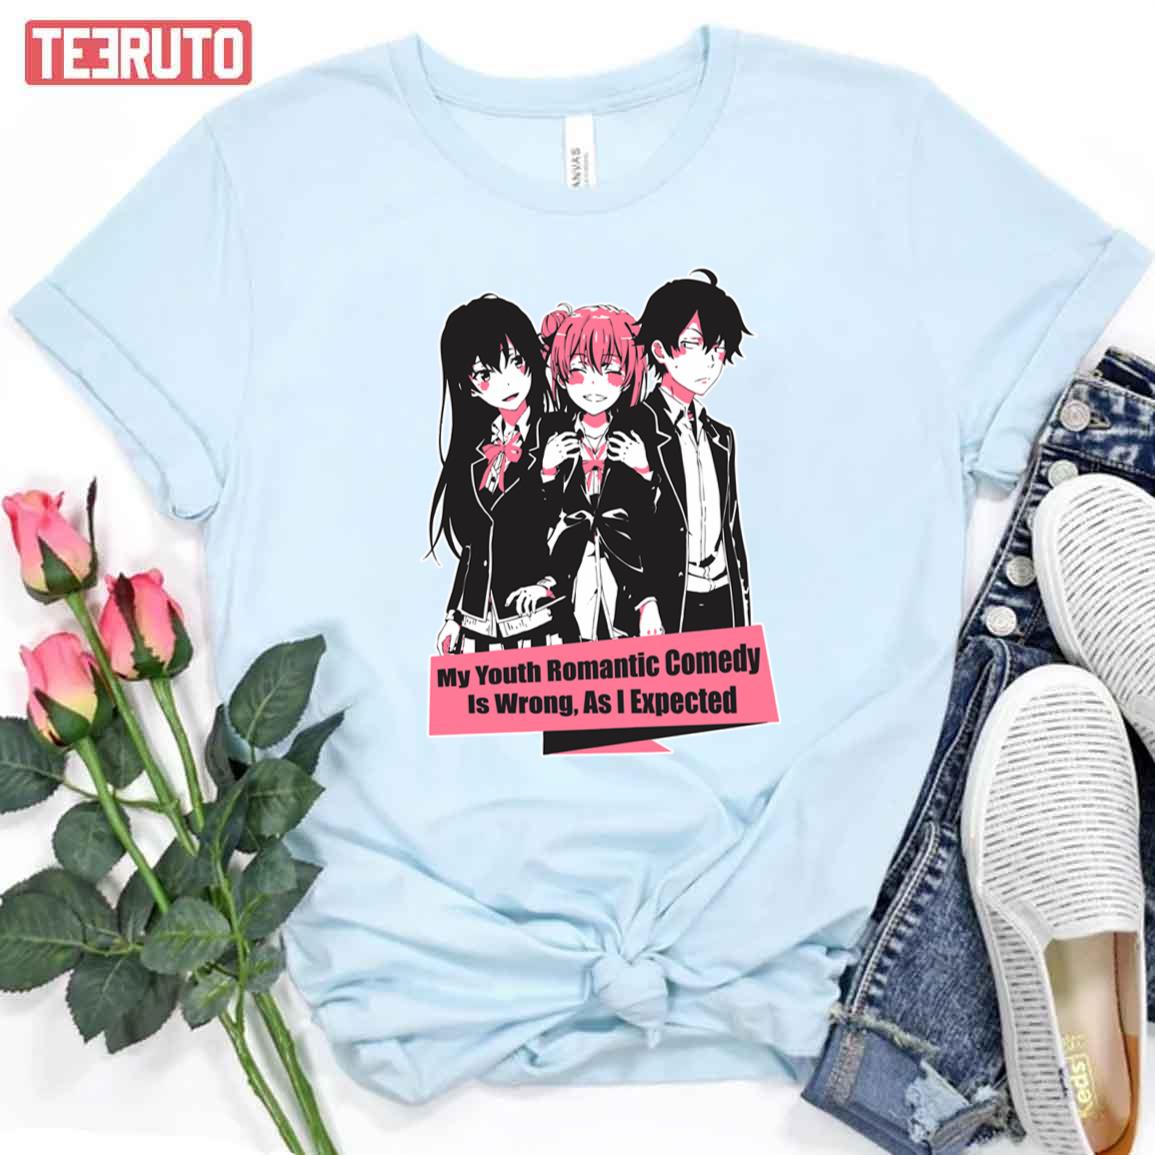 Oregairu My Youth Romantic Comedy Is Wrong As I Expected Unisex T-Shirt